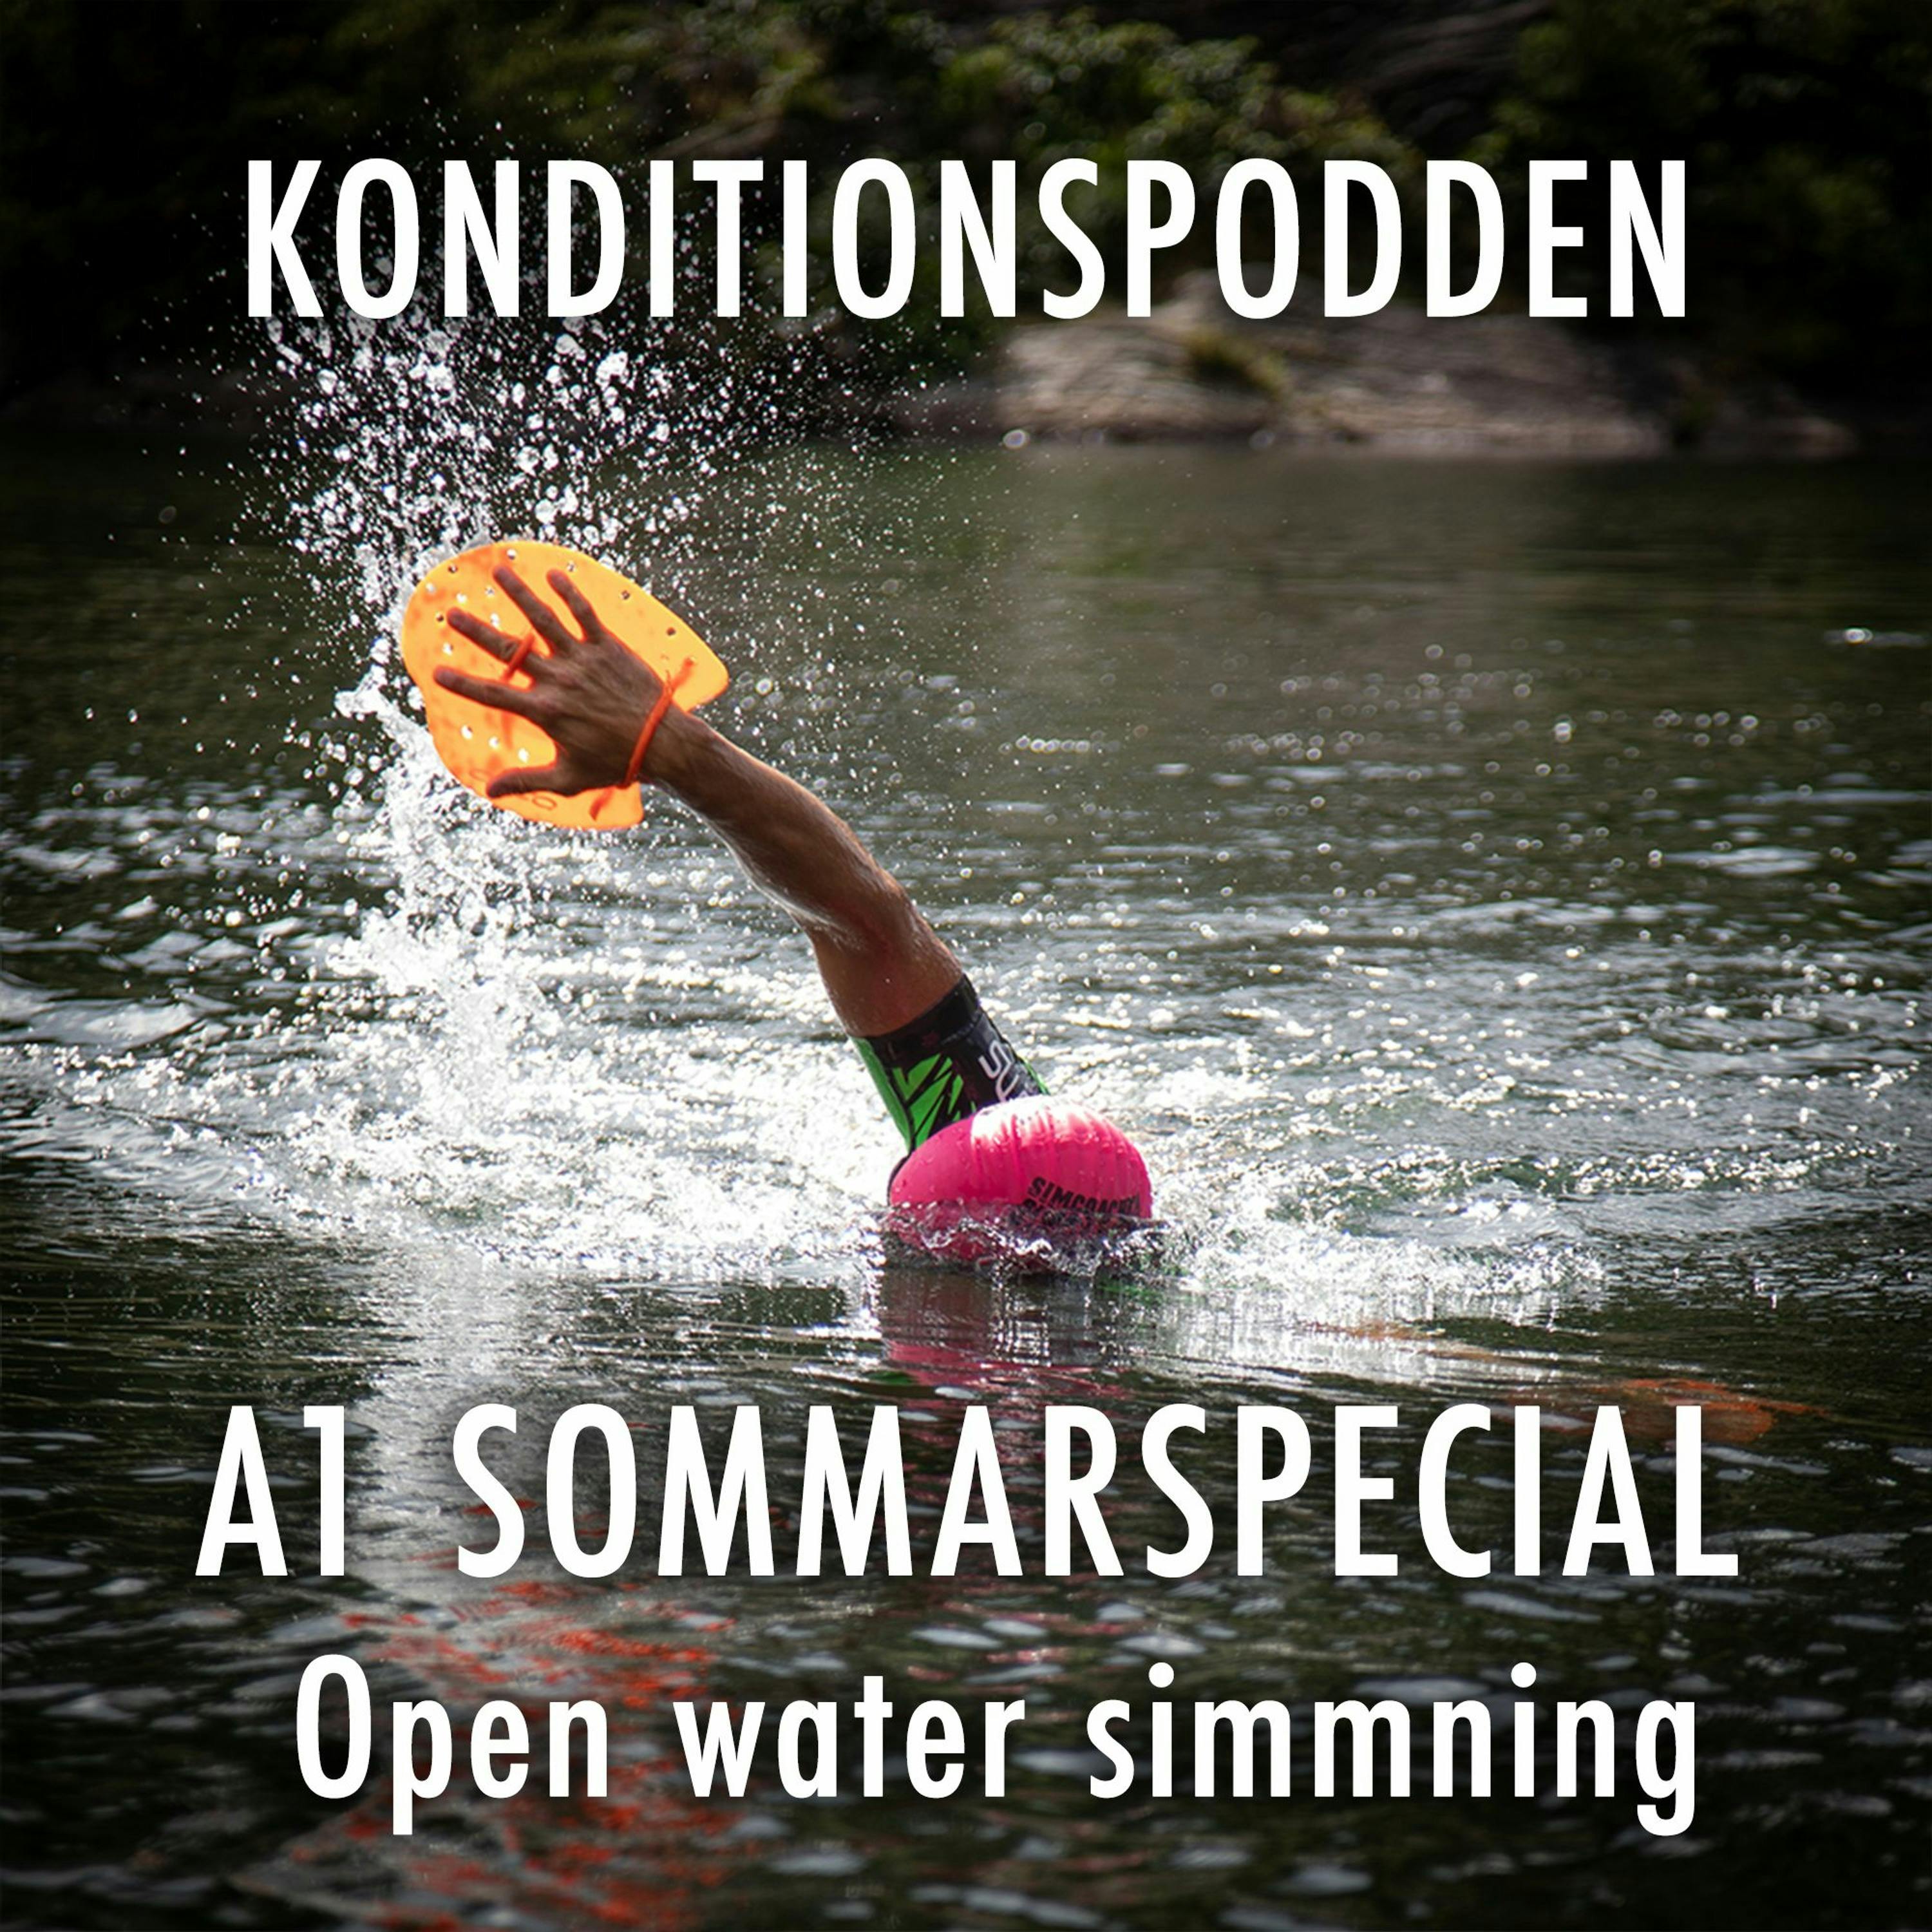 Sommarspecial A1 Open water